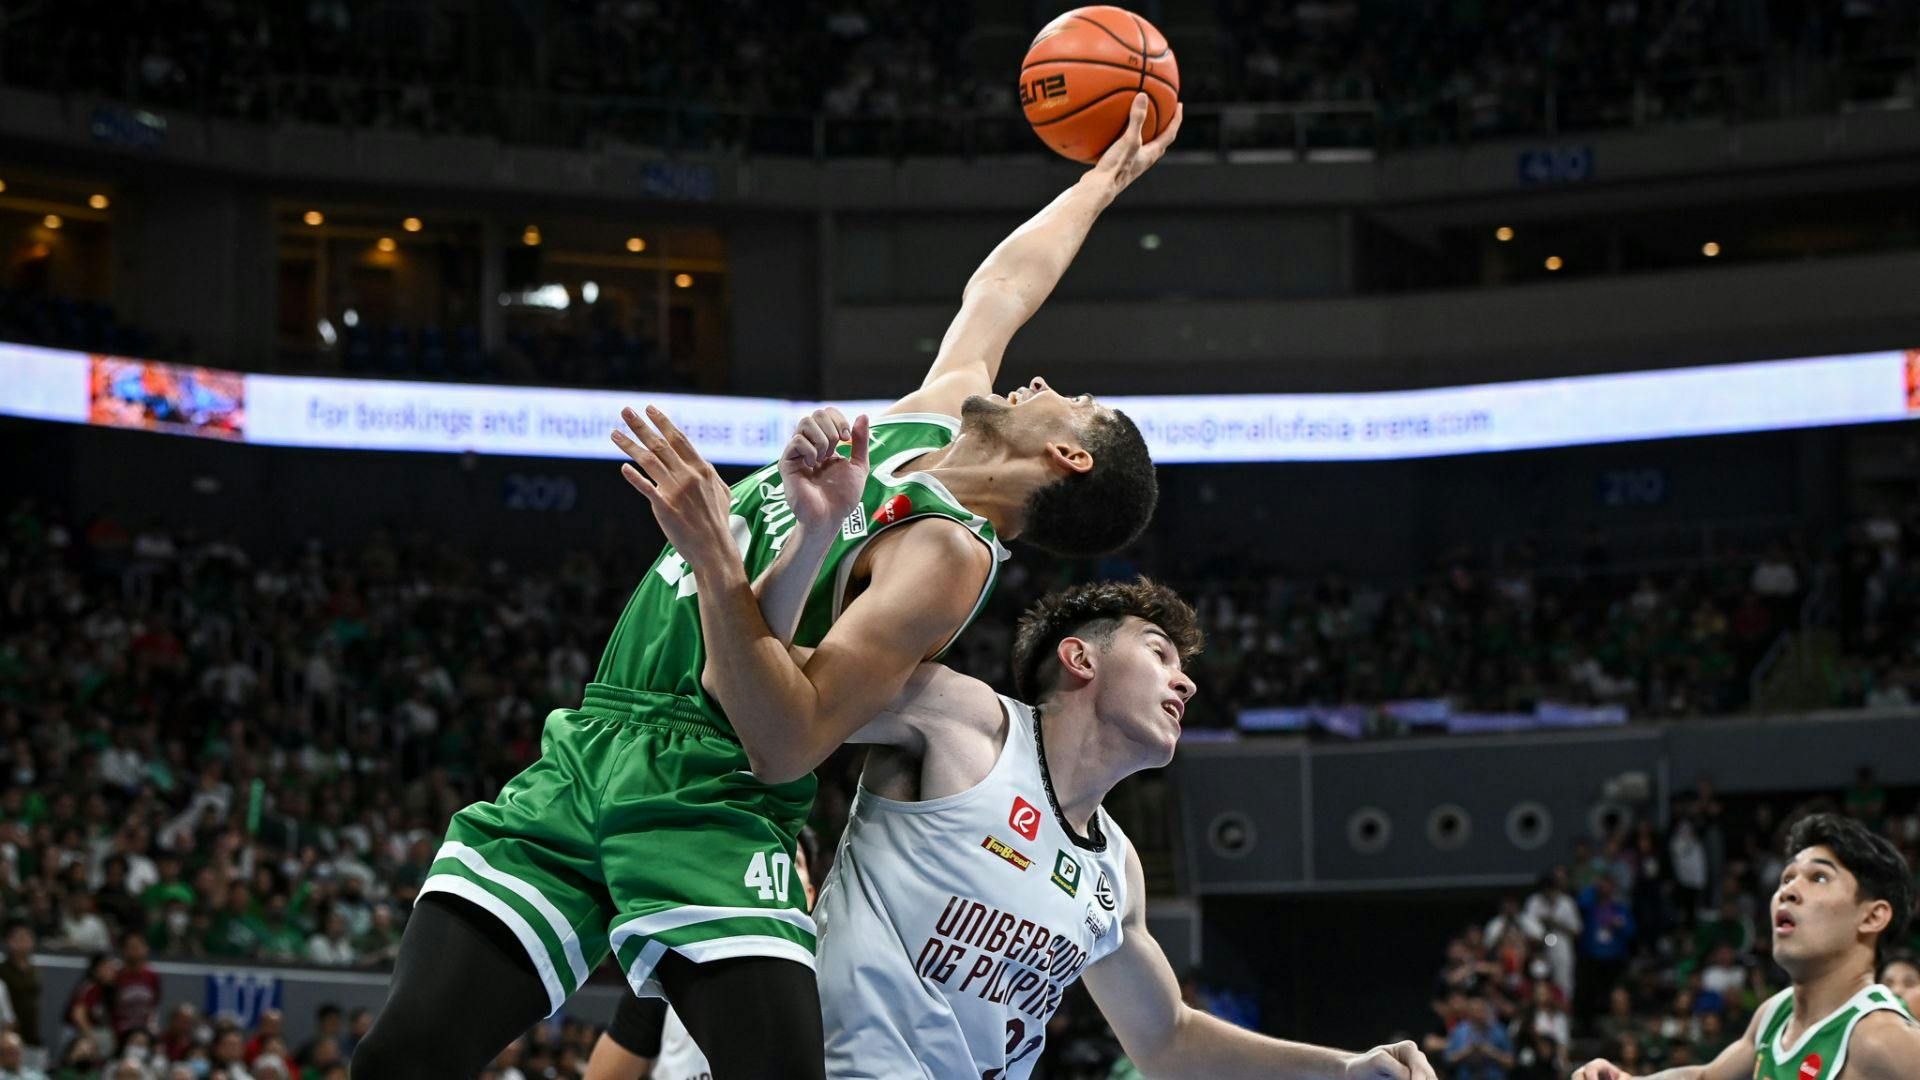 La Salle coach Topex Robinson admits ‘not getting the memo’ on one aspect in finals against UP